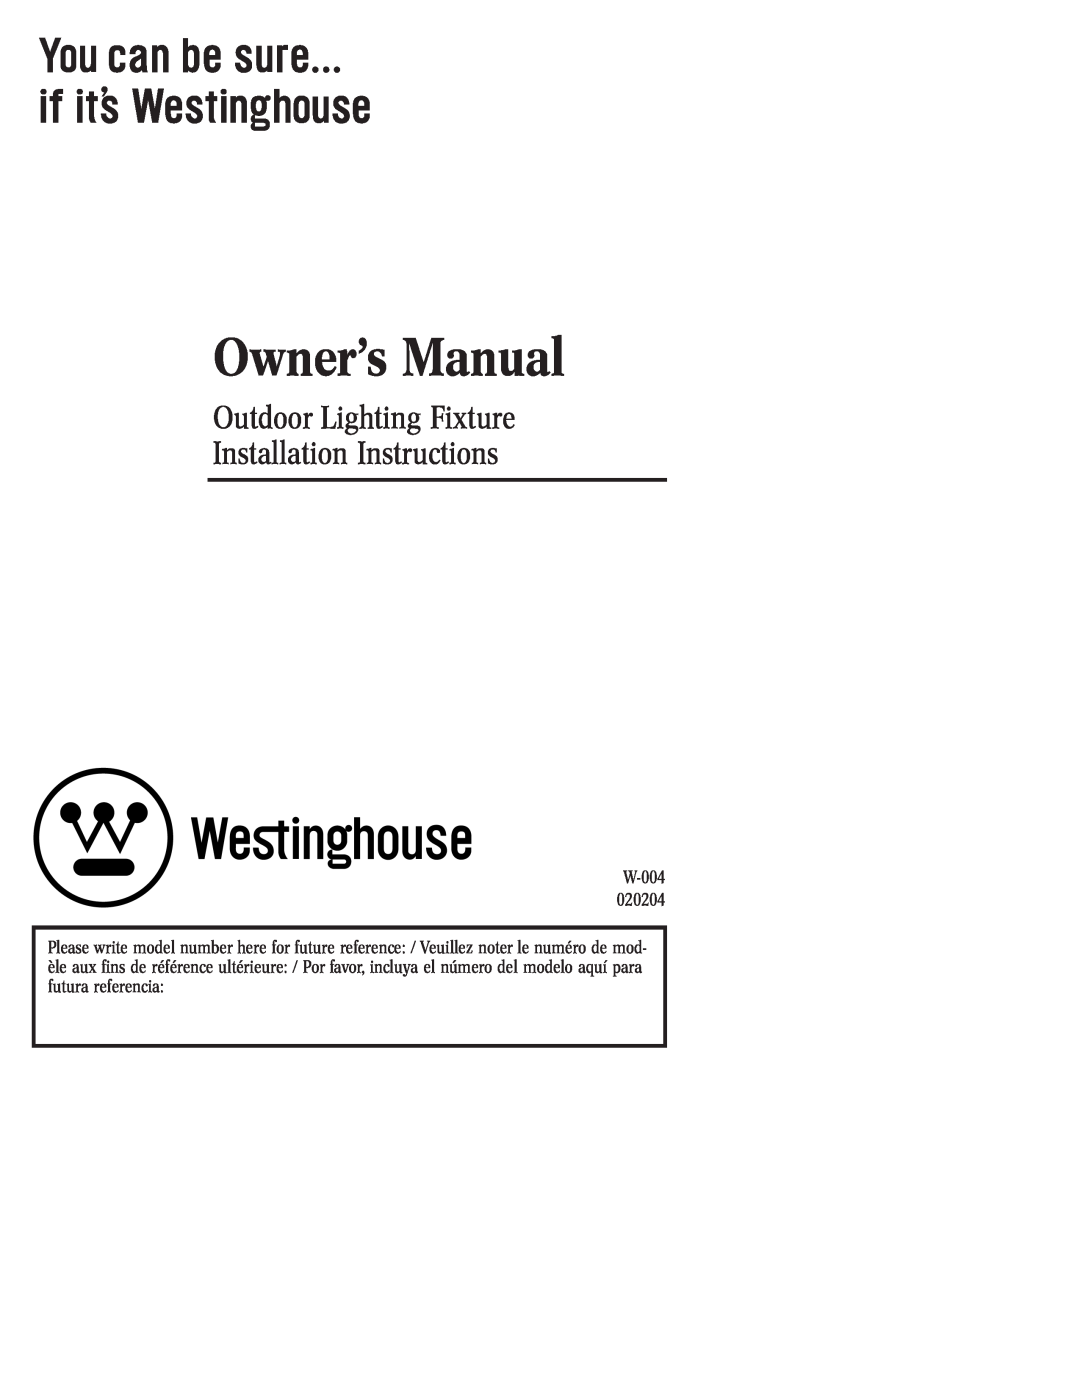 Westinghouse 20204 owner manual Outdoor Lighting Fixture, Installation Instructions 